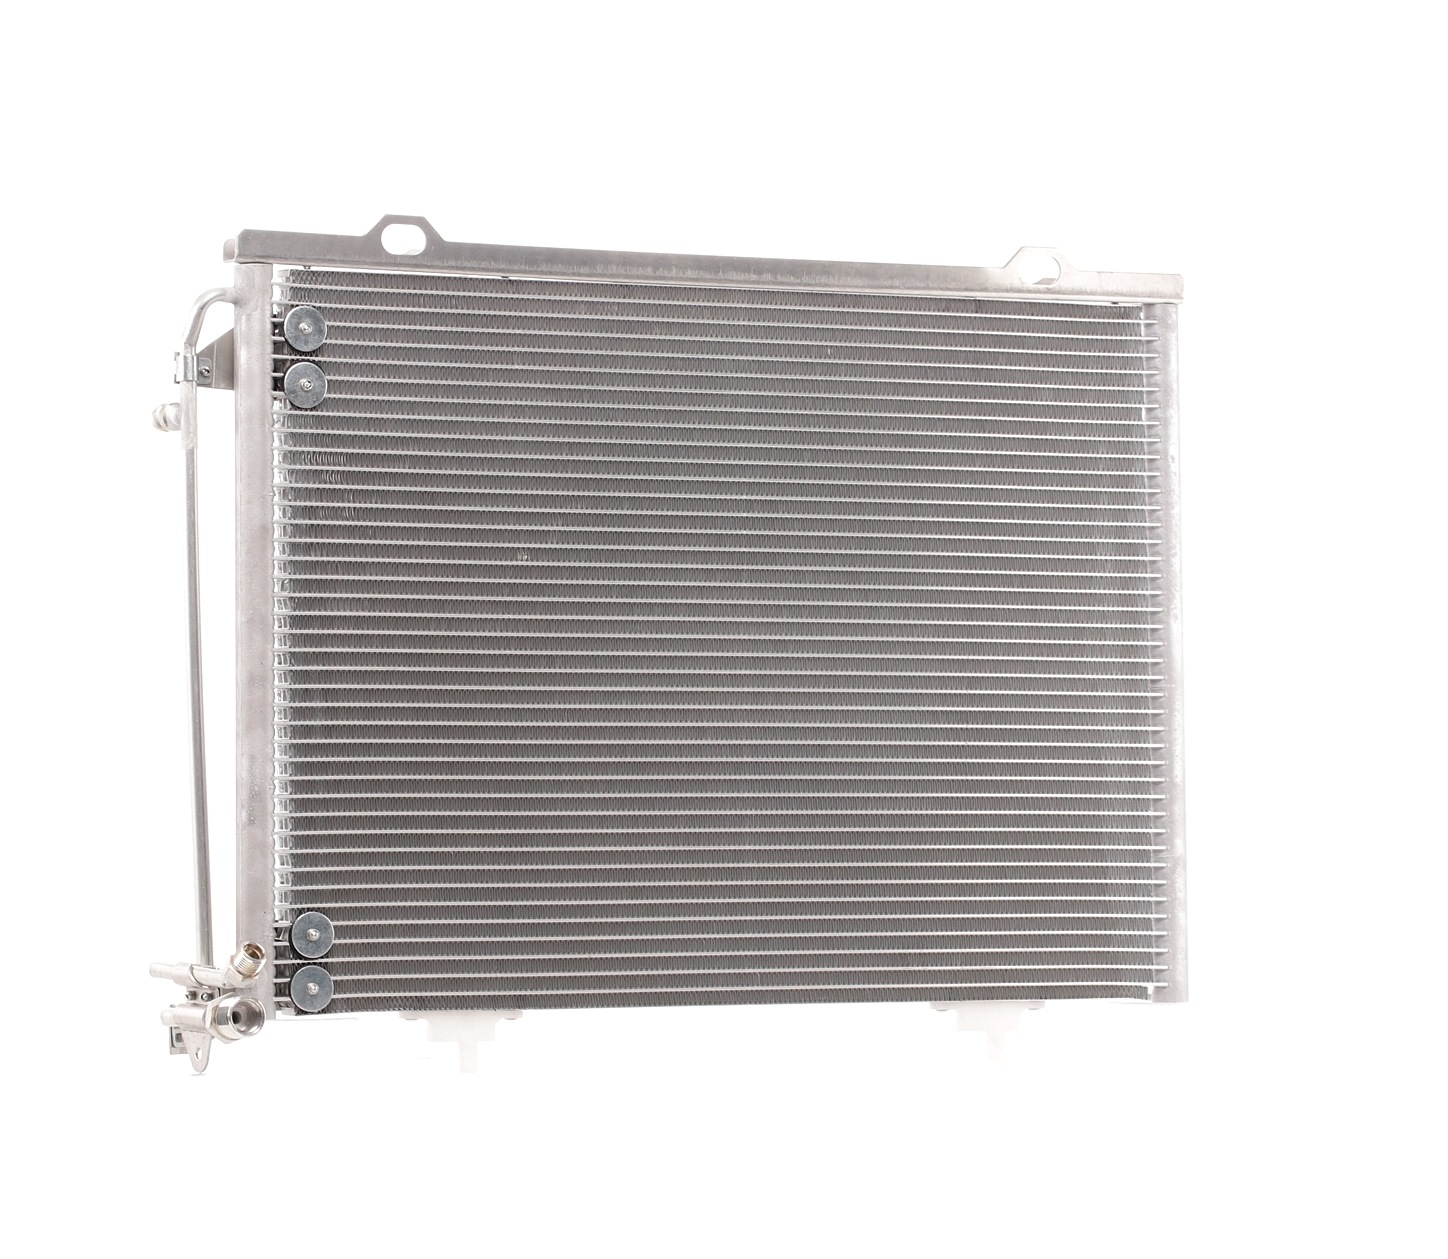 STARK SKCD-0110248 Air conditioning condenser without dryer, 595x411x16, Aluminium, R 134a, 595mm